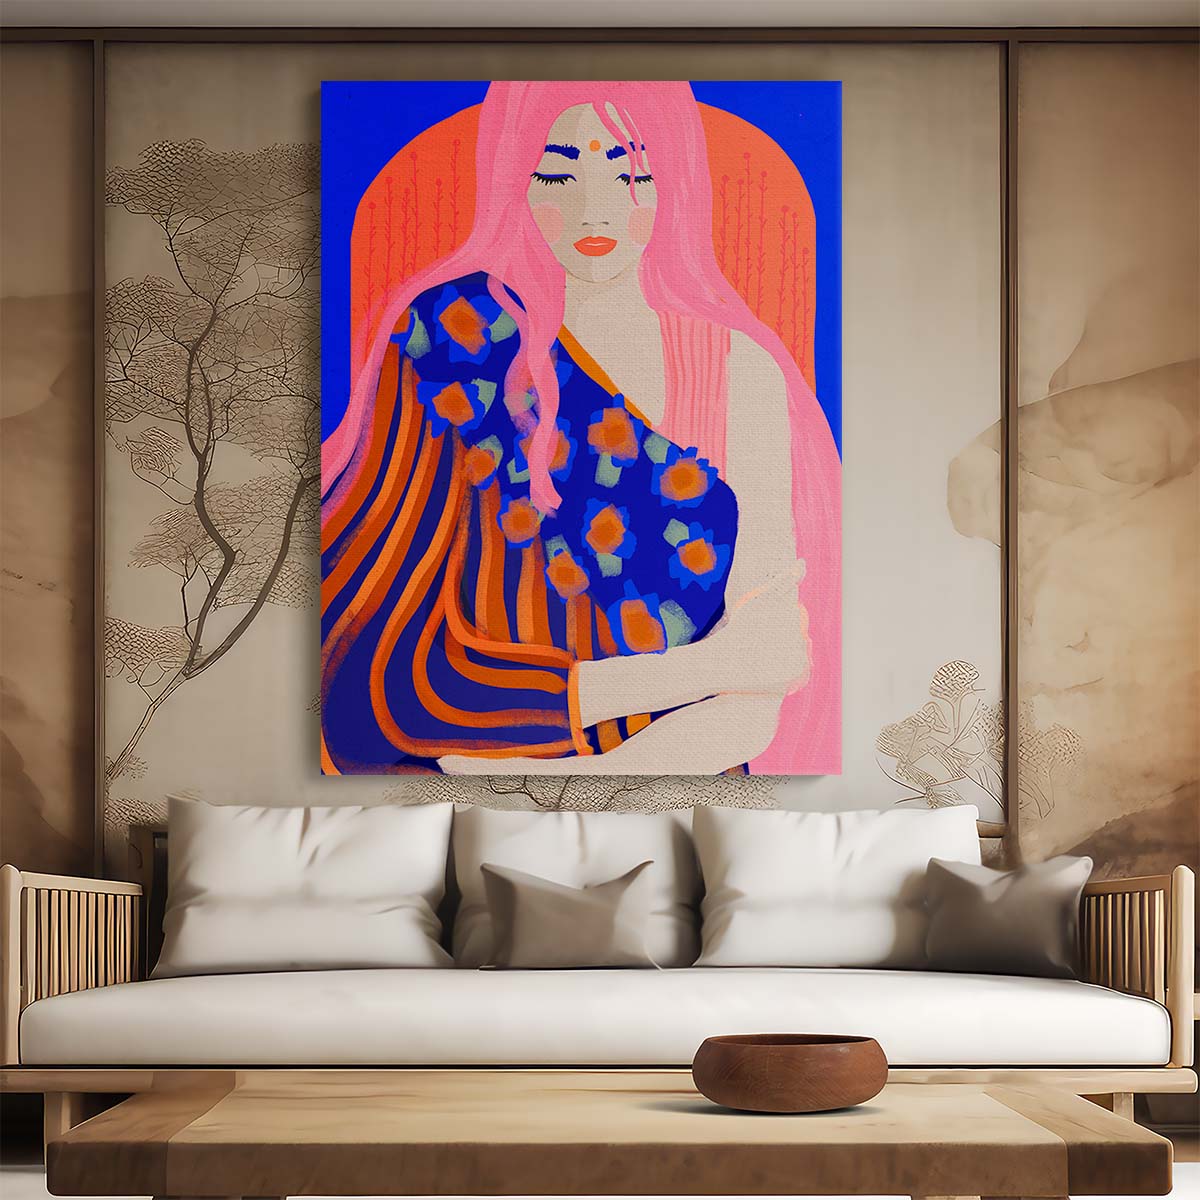 Colorful Yoga Woman Portrait Illustration by Treechild - Figurative Art by Luxuriance Designs, made in USA